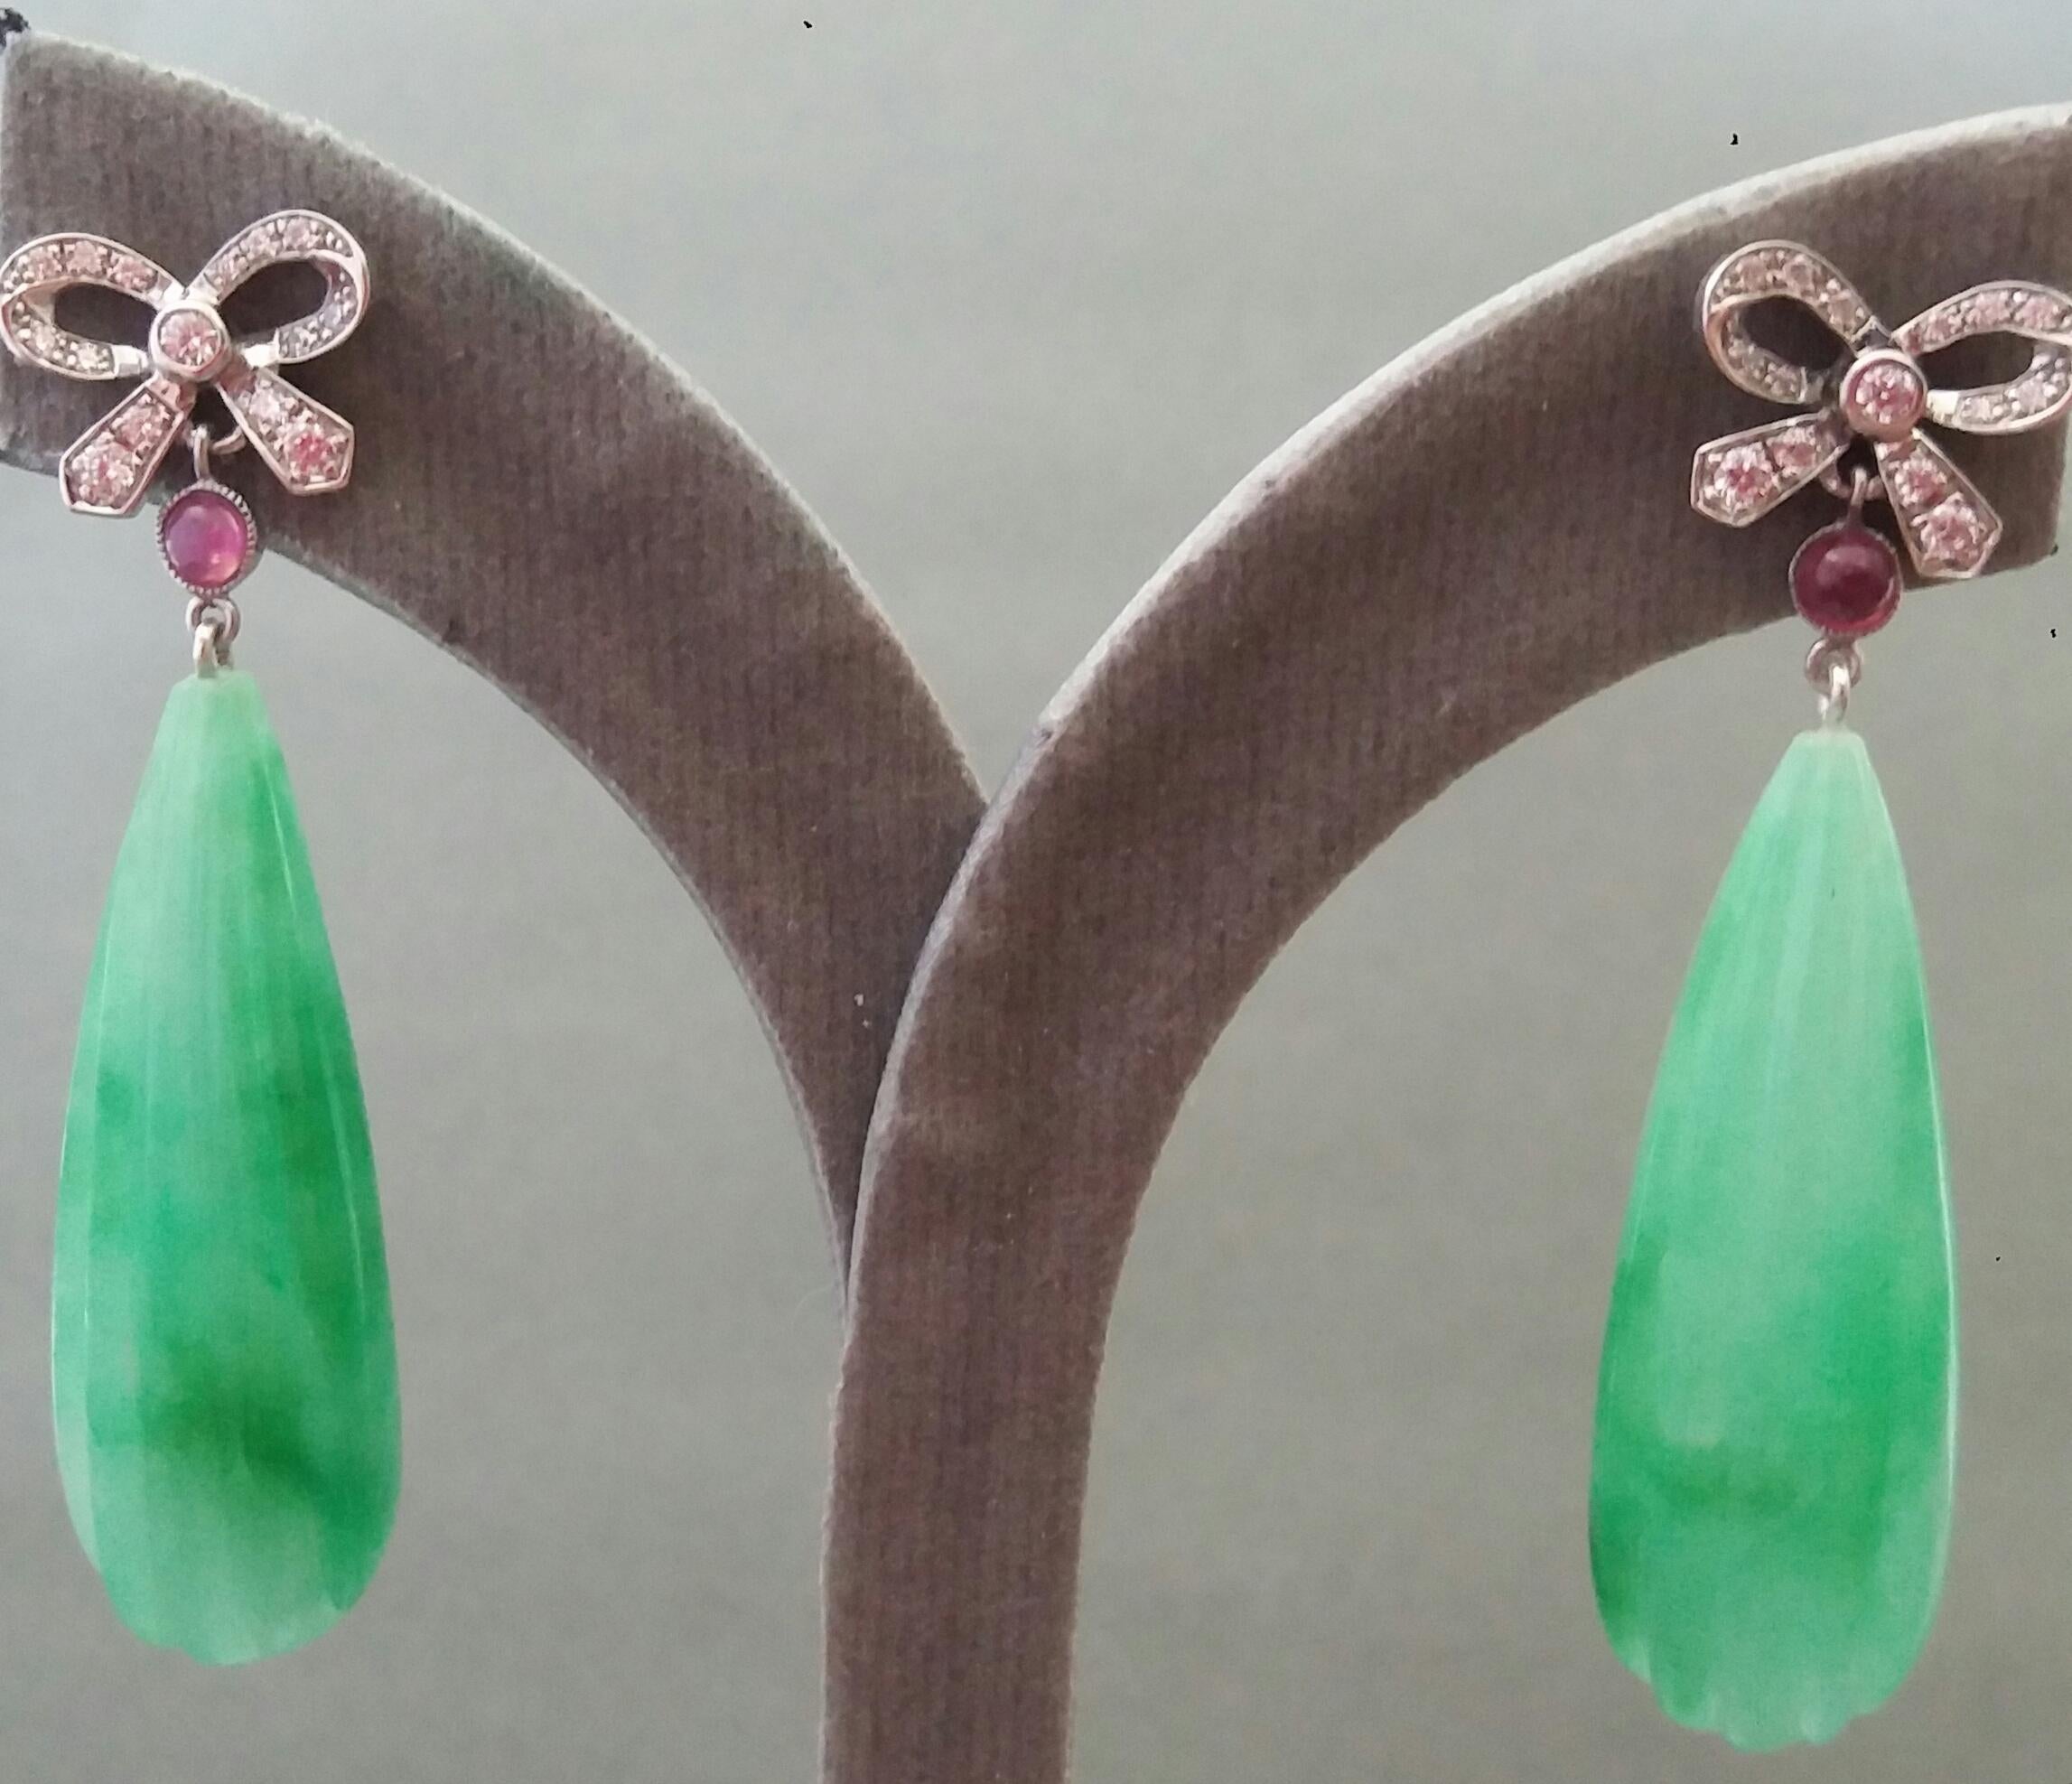 Art Deco Style 14k Gold And Diamonds Bows Rubies Carved Jade Dangle Earrings 3